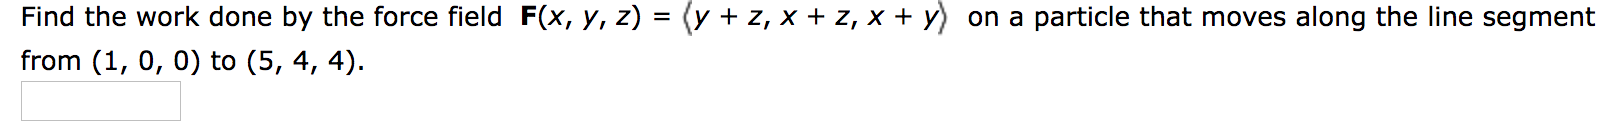 Find the work done by the force field F(x, y, z) = (y + z, x + z, x + y) on a particle that moves along the line segment
from (1, 0, 0) to (5, 4, 4).
